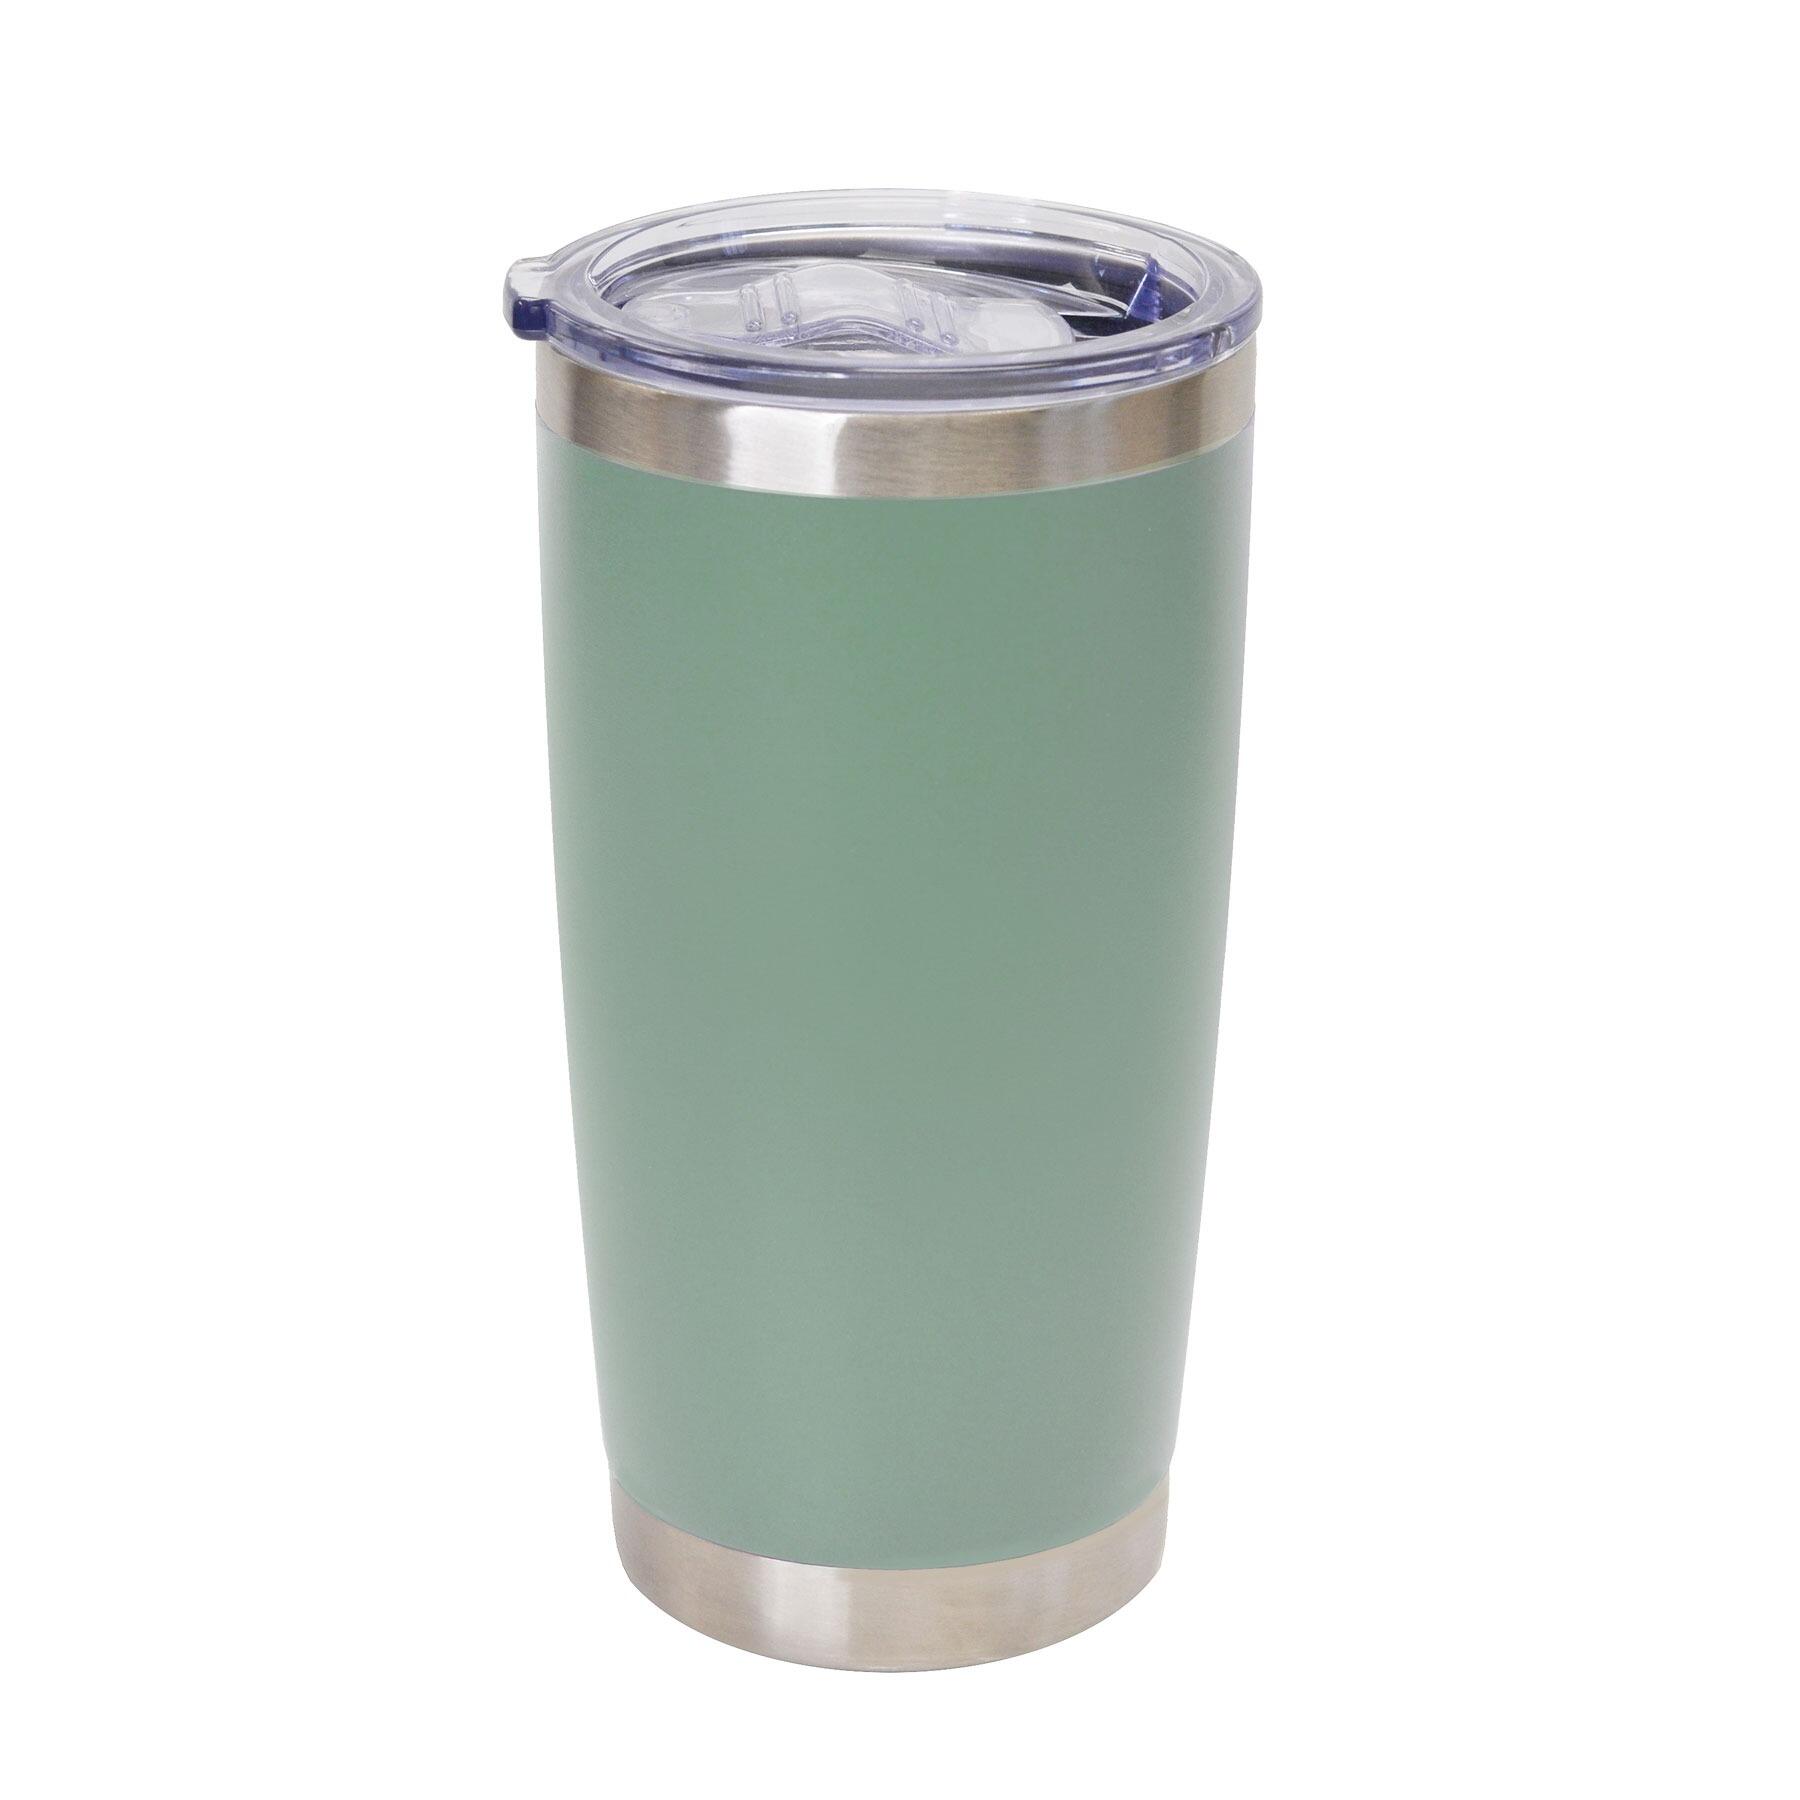 ALFIE 20oz Insulated Pint Cup & Lid - Sage Green (600ml)